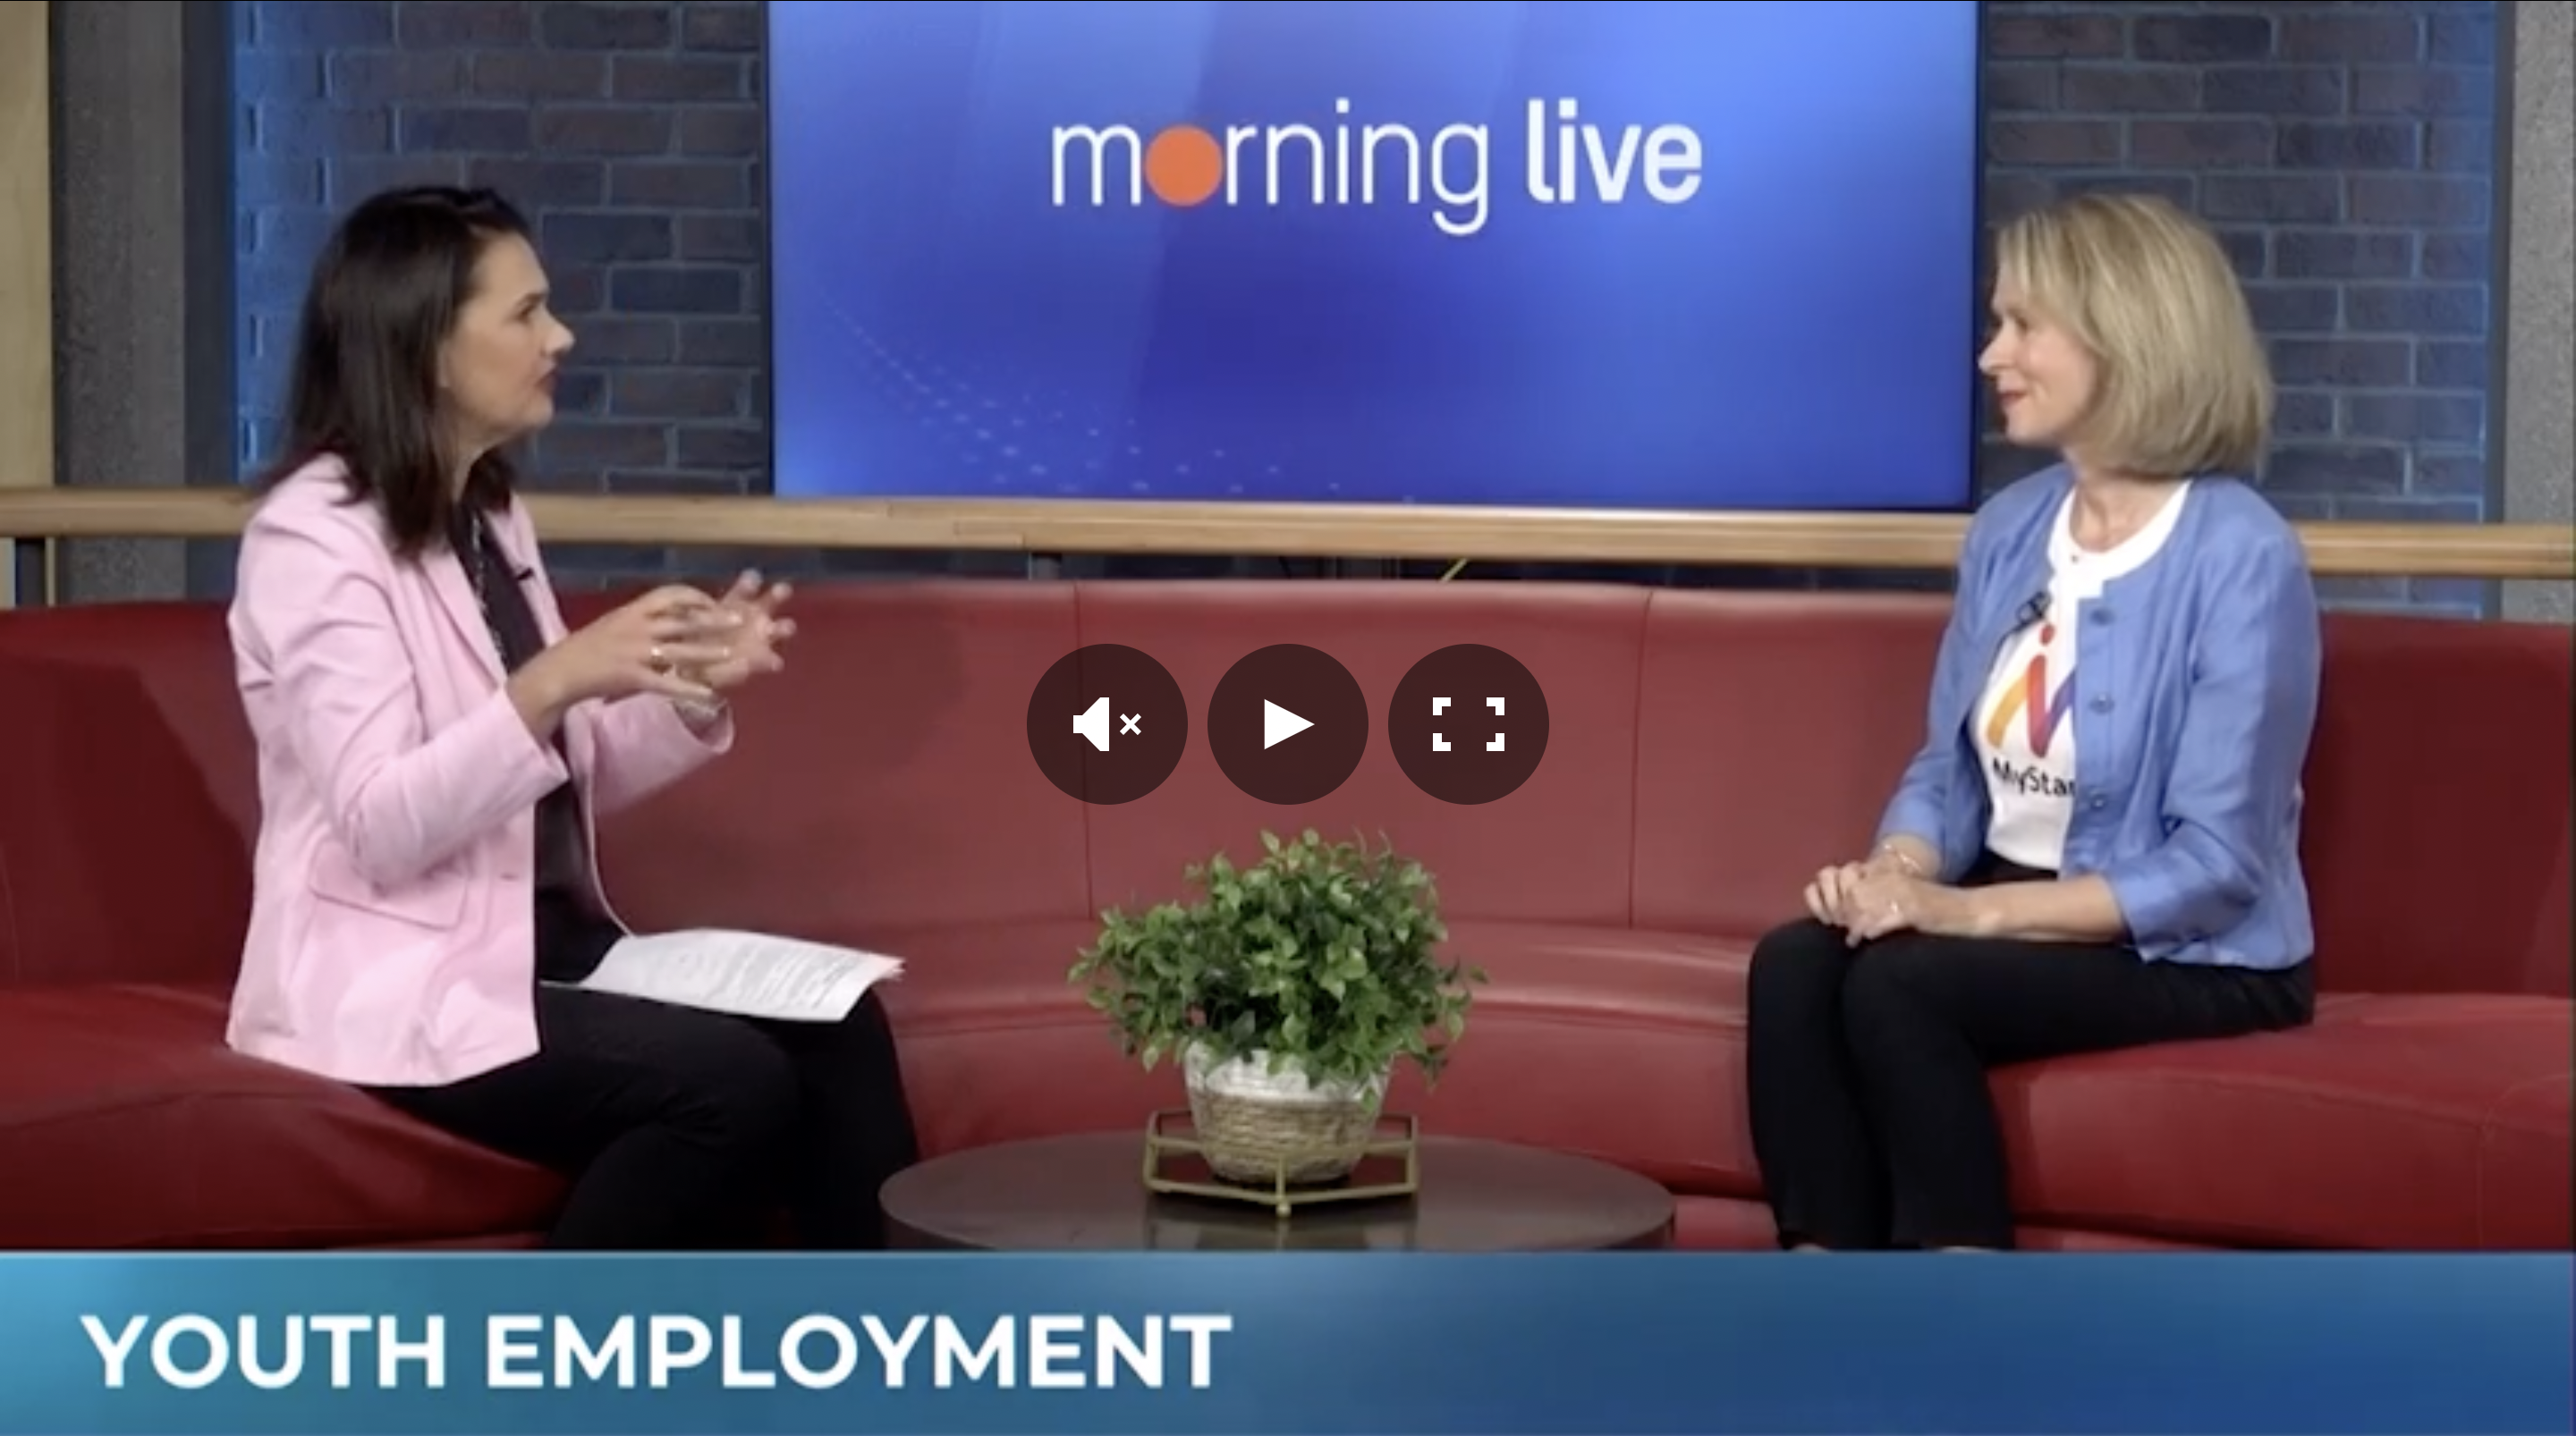 Mystartr helps young people overcome barriers to find jobs - CHCH Hamilton, Morning Live